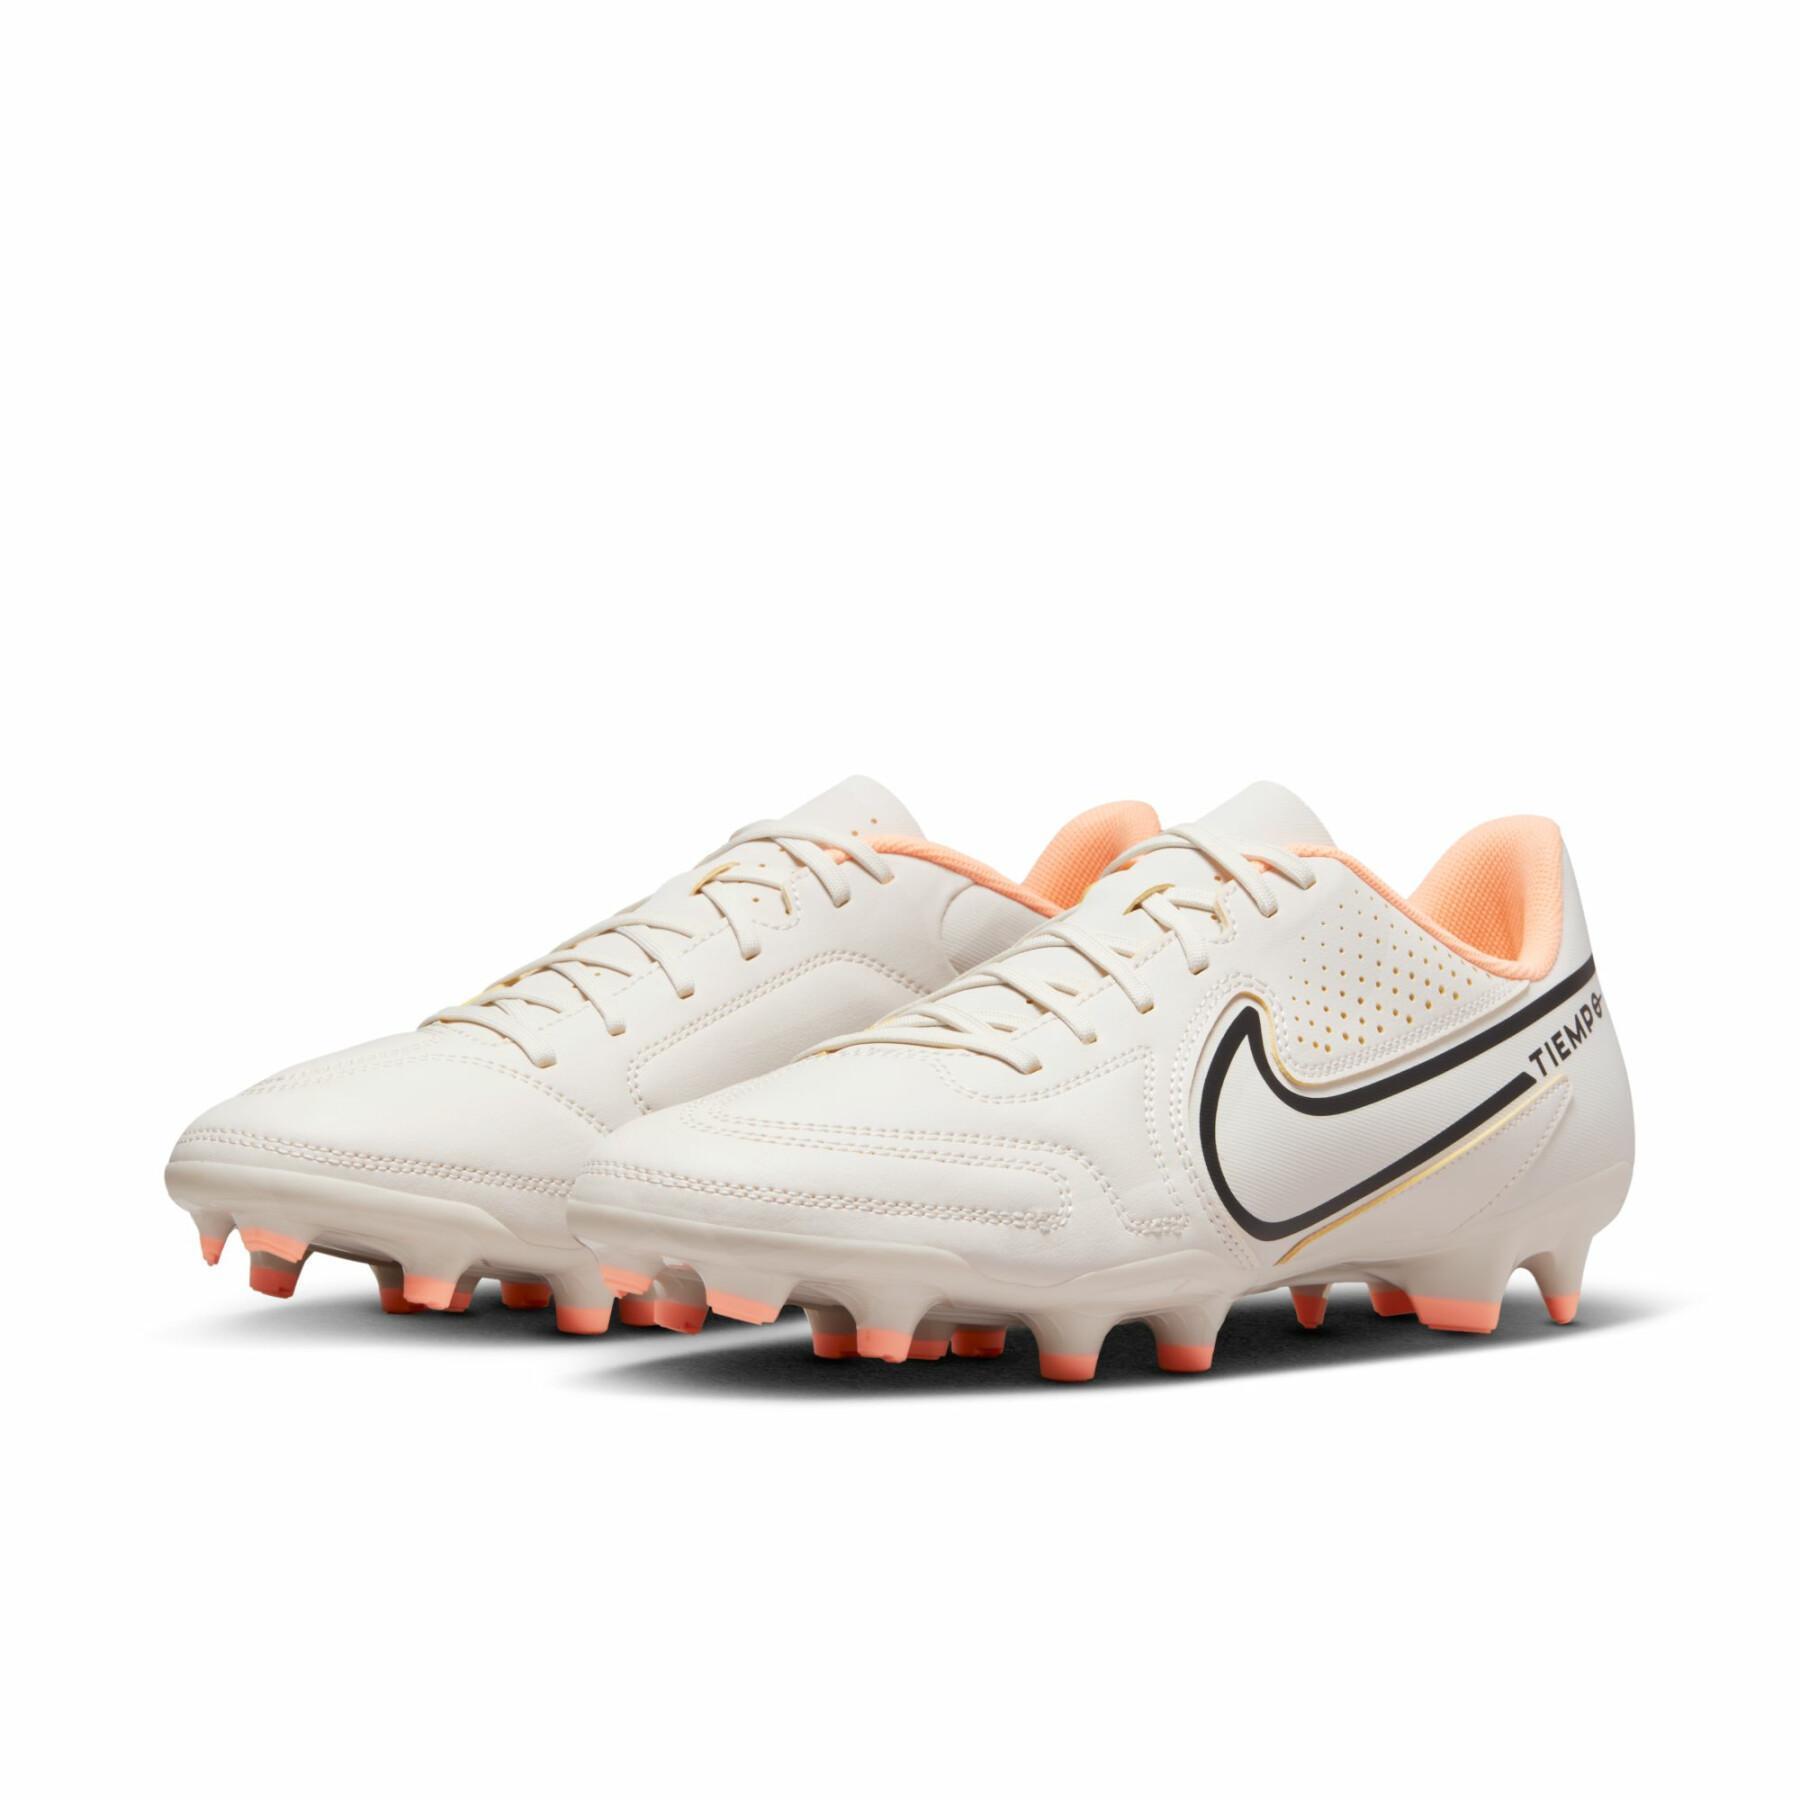 Chaussures de football Nike Tiempo Legend 9 Club MG - Lucent Pack